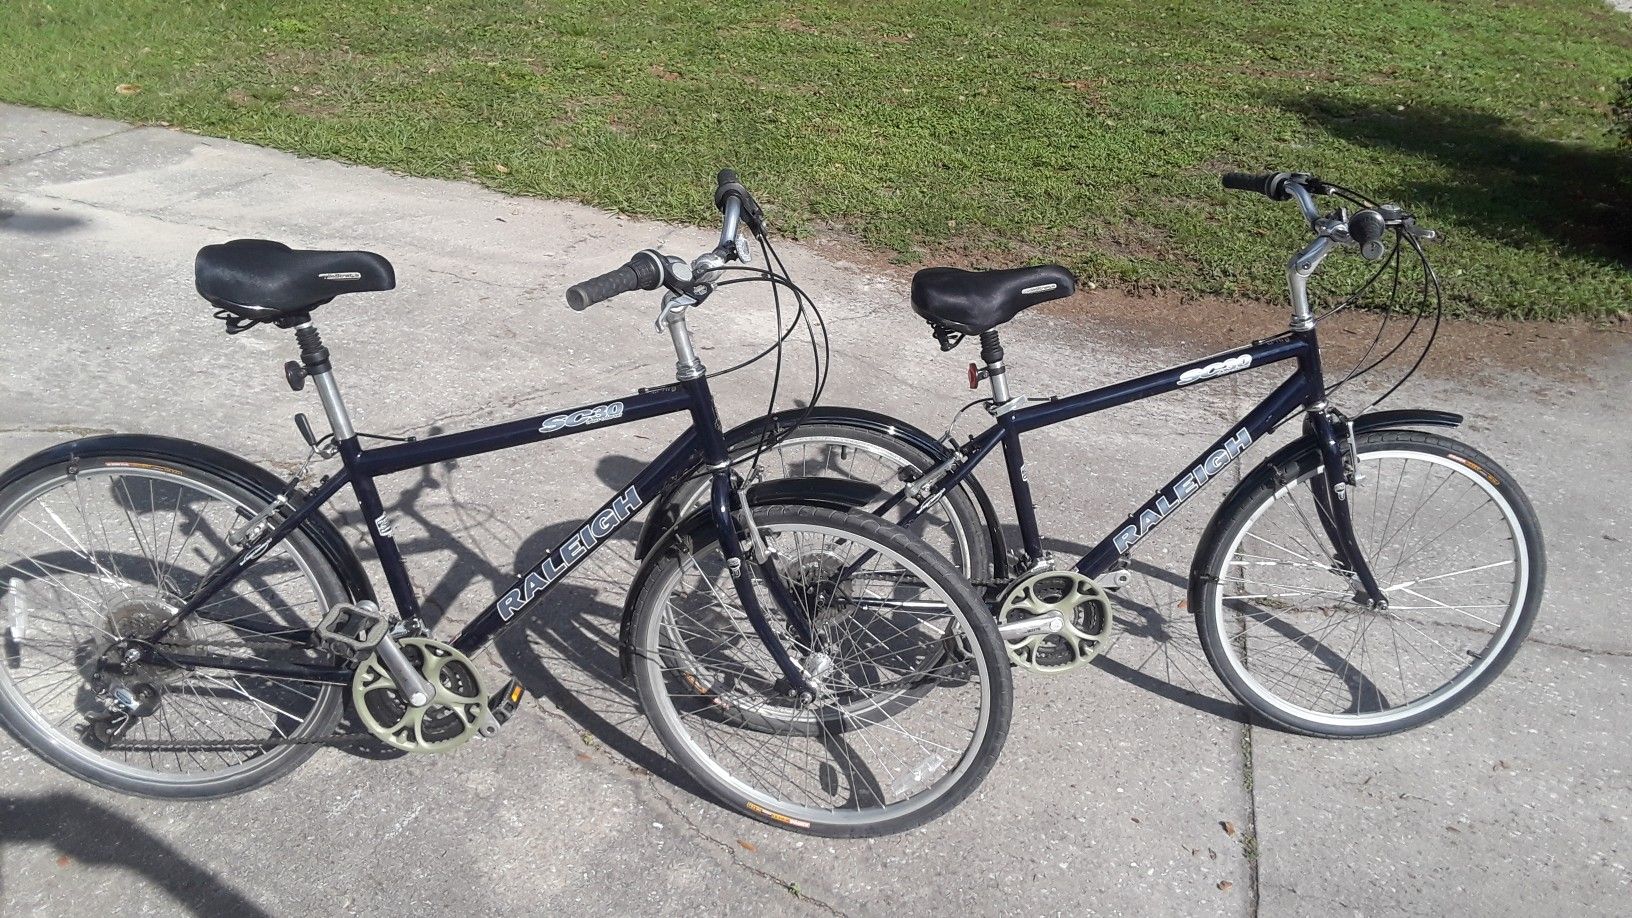 2 Raleigh SC30 Sport Comfort 21 speed bikes with new 26" hybrid tires, 17" frames.